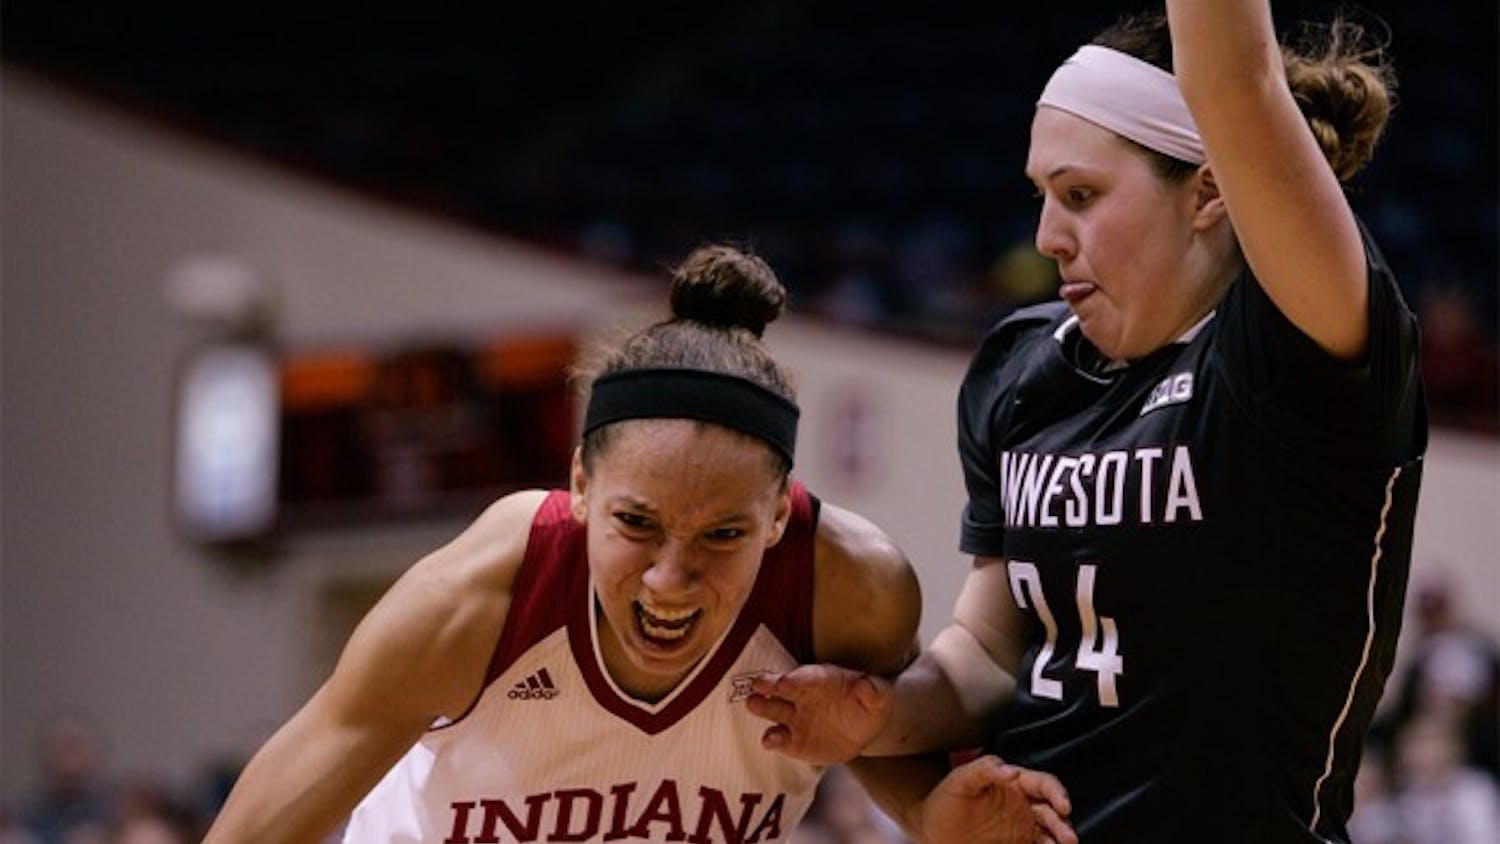 Junior guard Alexis Gassion dribbles the ball up the court against a Minnesota defender Feb. 18 at Assembly Hall.